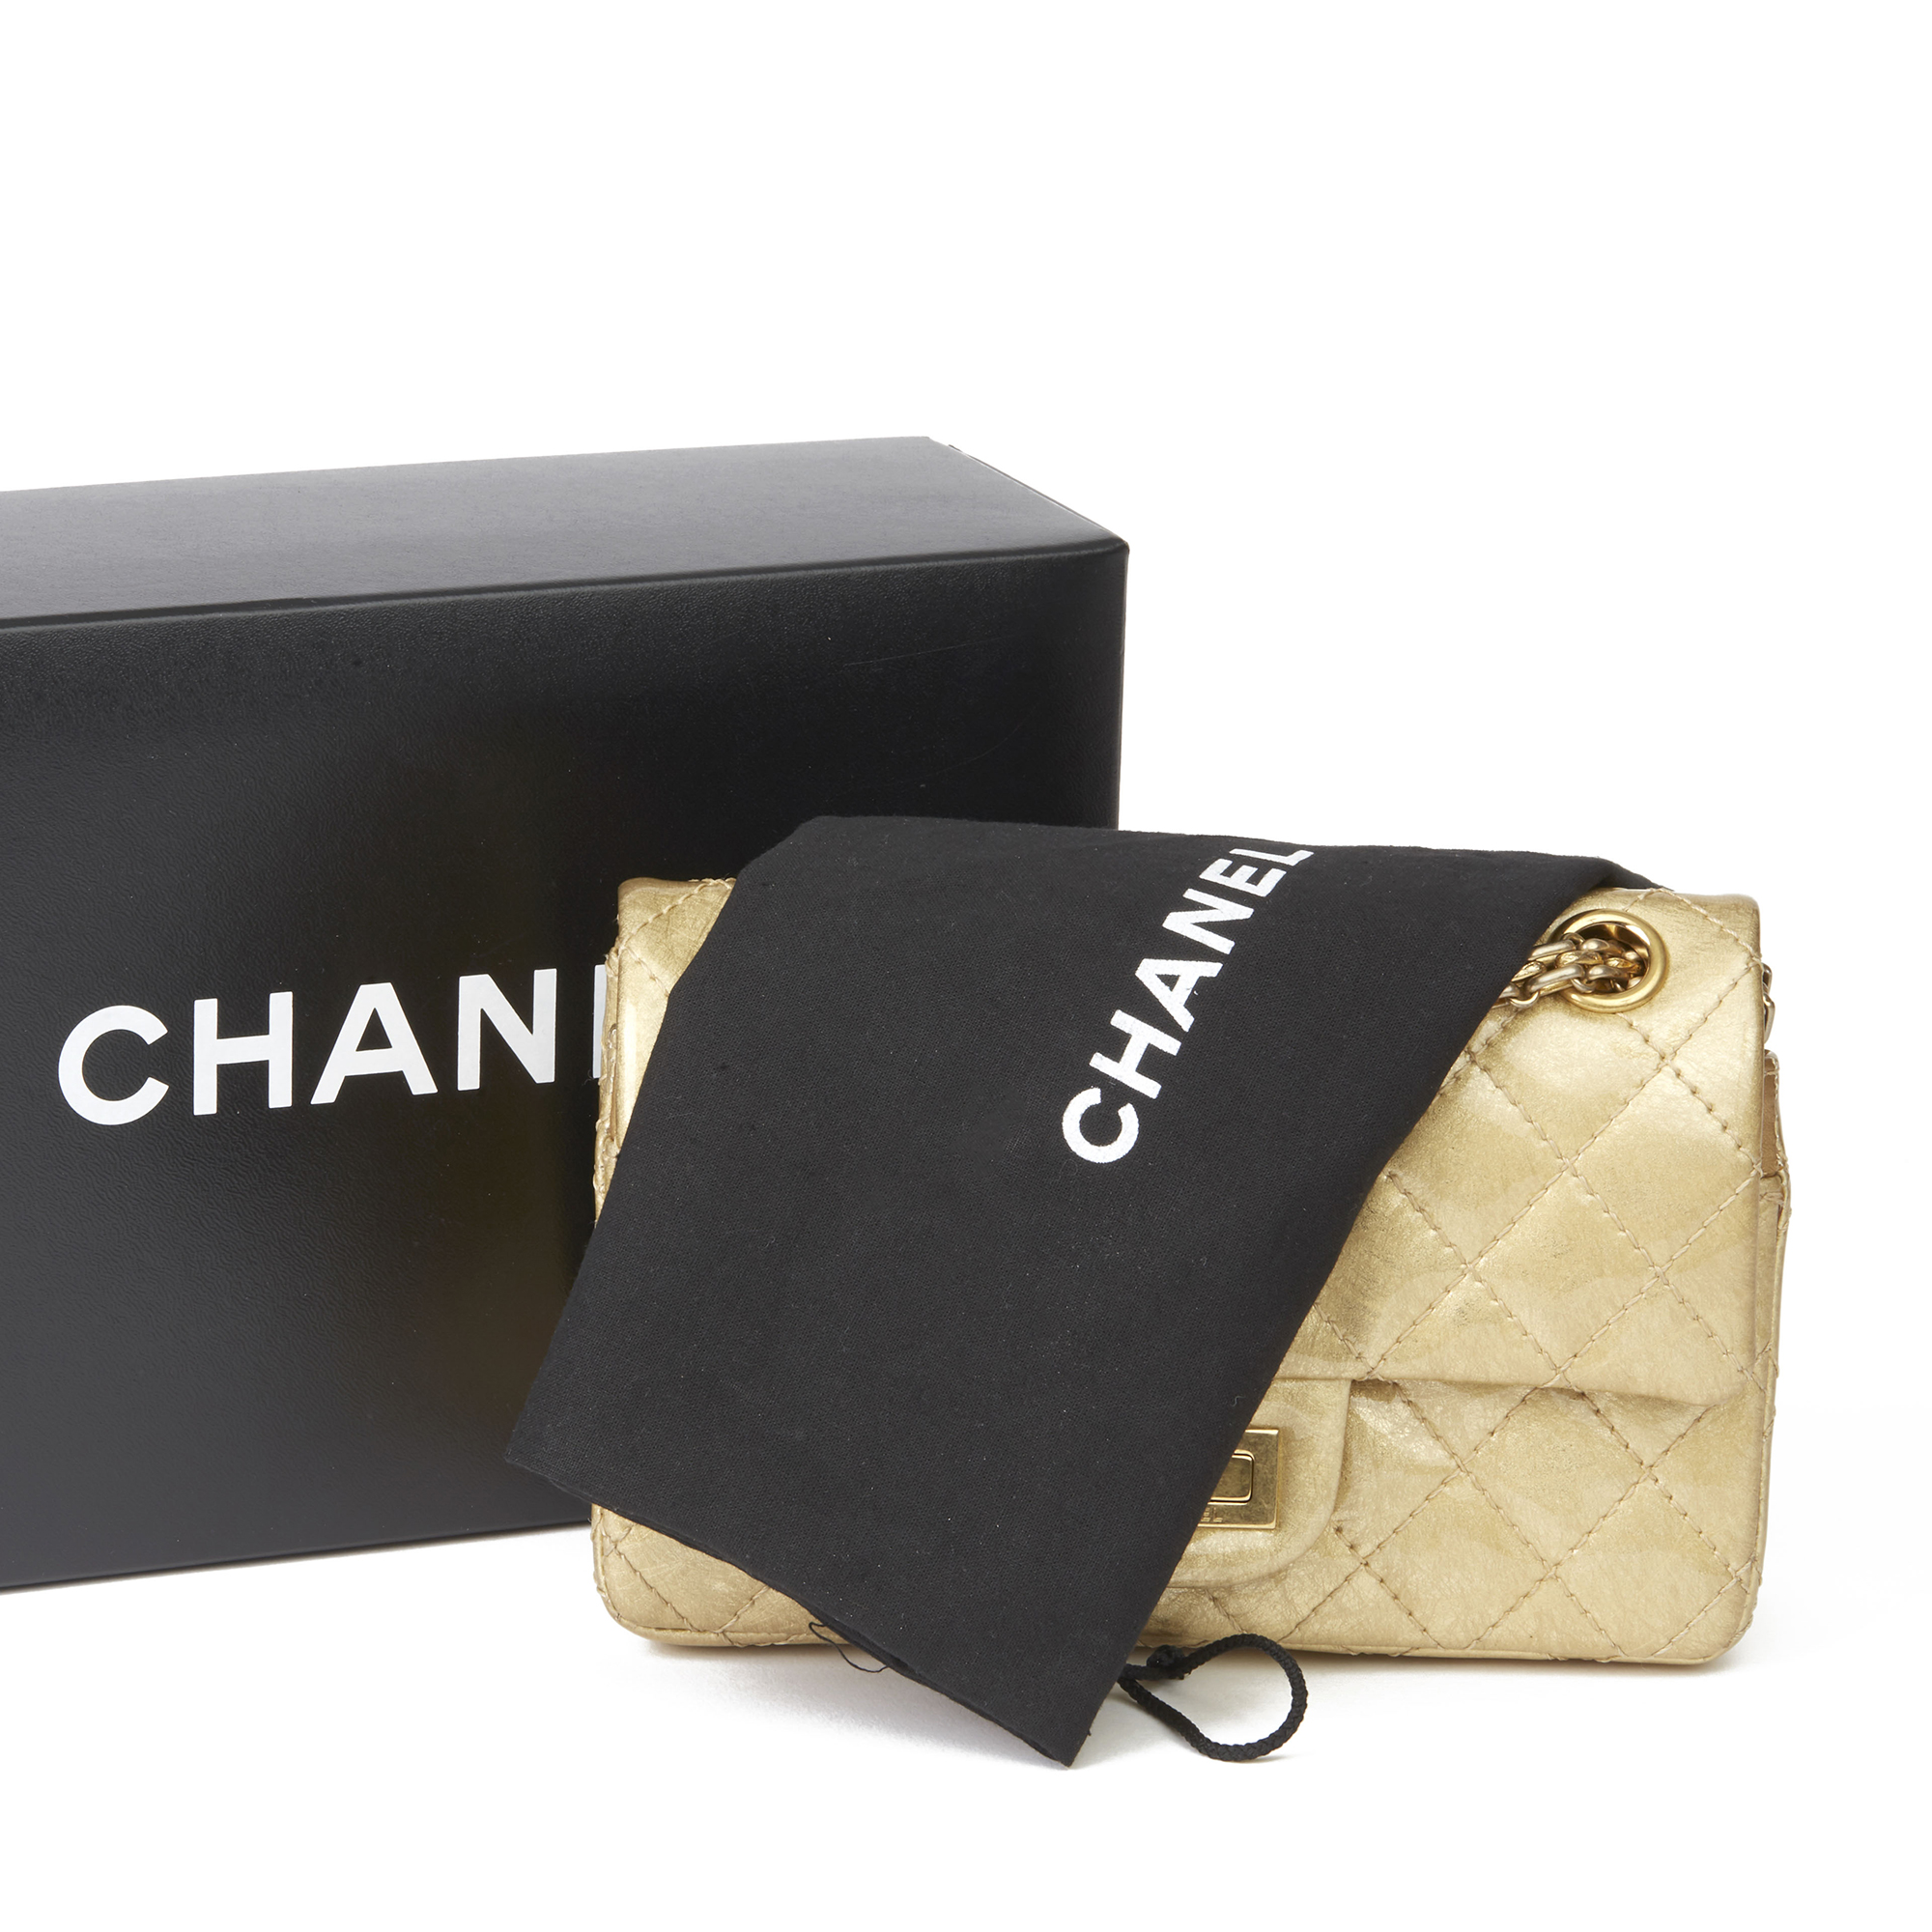 Chanel 2.55 Reissue 224 Double Flap Bag - Image 3 of 11